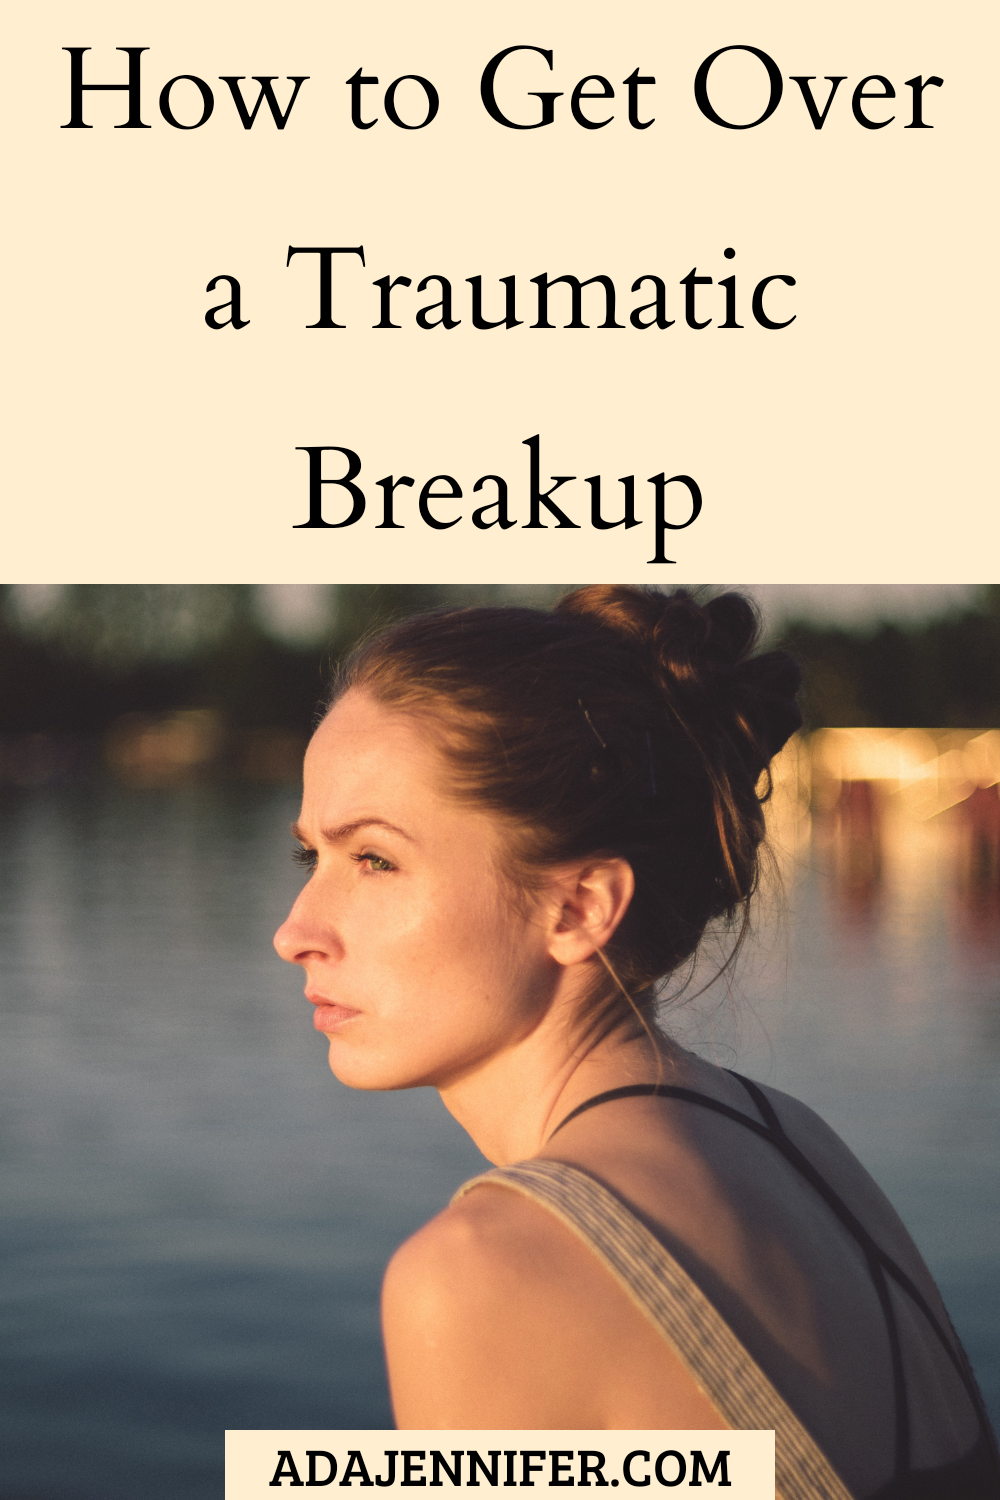 What to do after a breakup